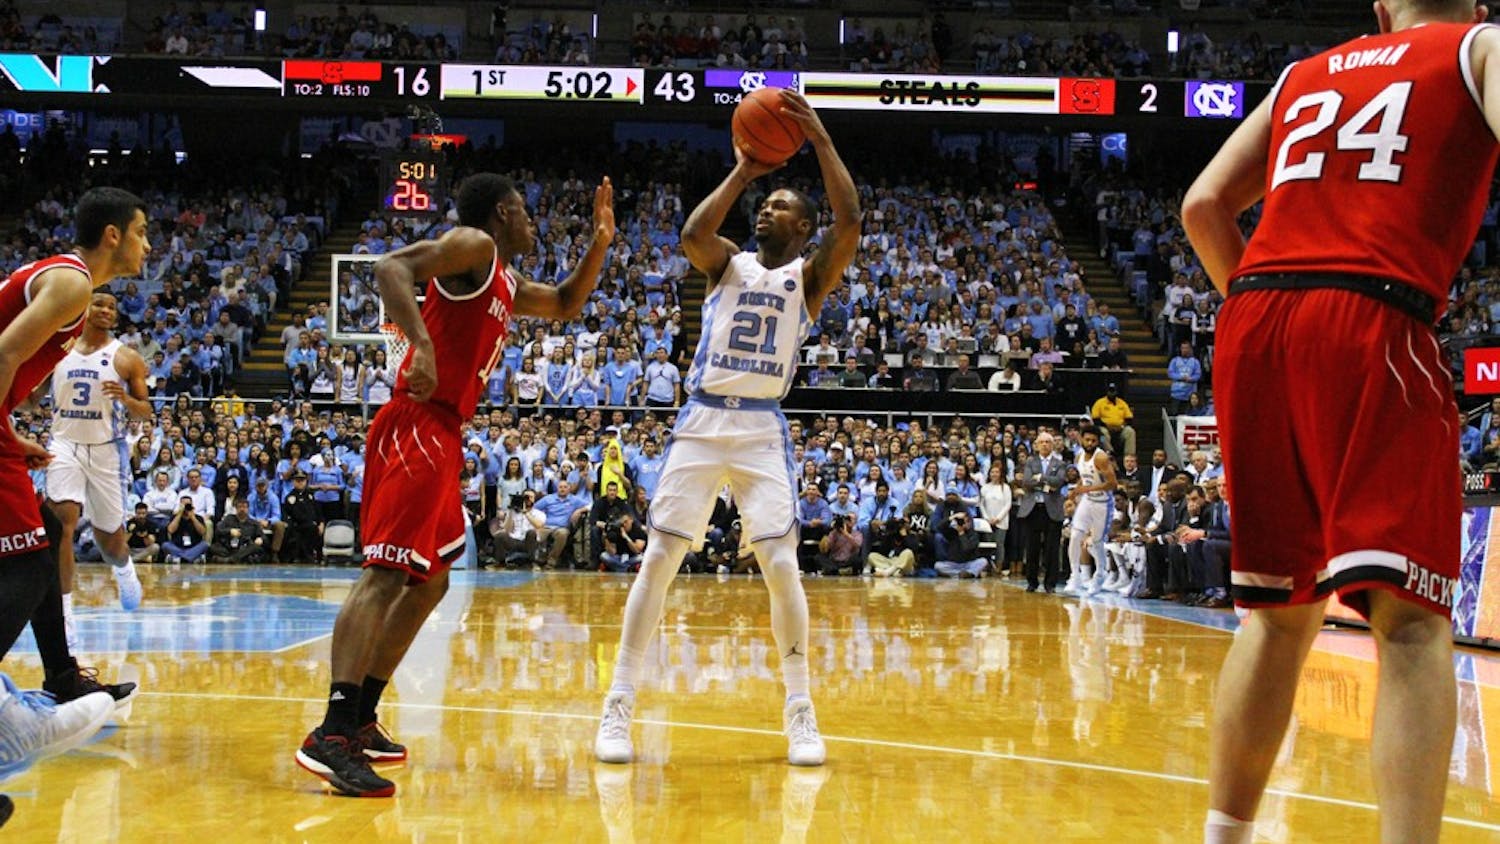 North Carolina guard Seventh Woods (21) attempts a shot against N.C. State on Jan. 8. He has cut down on his turnovers during ACC play.